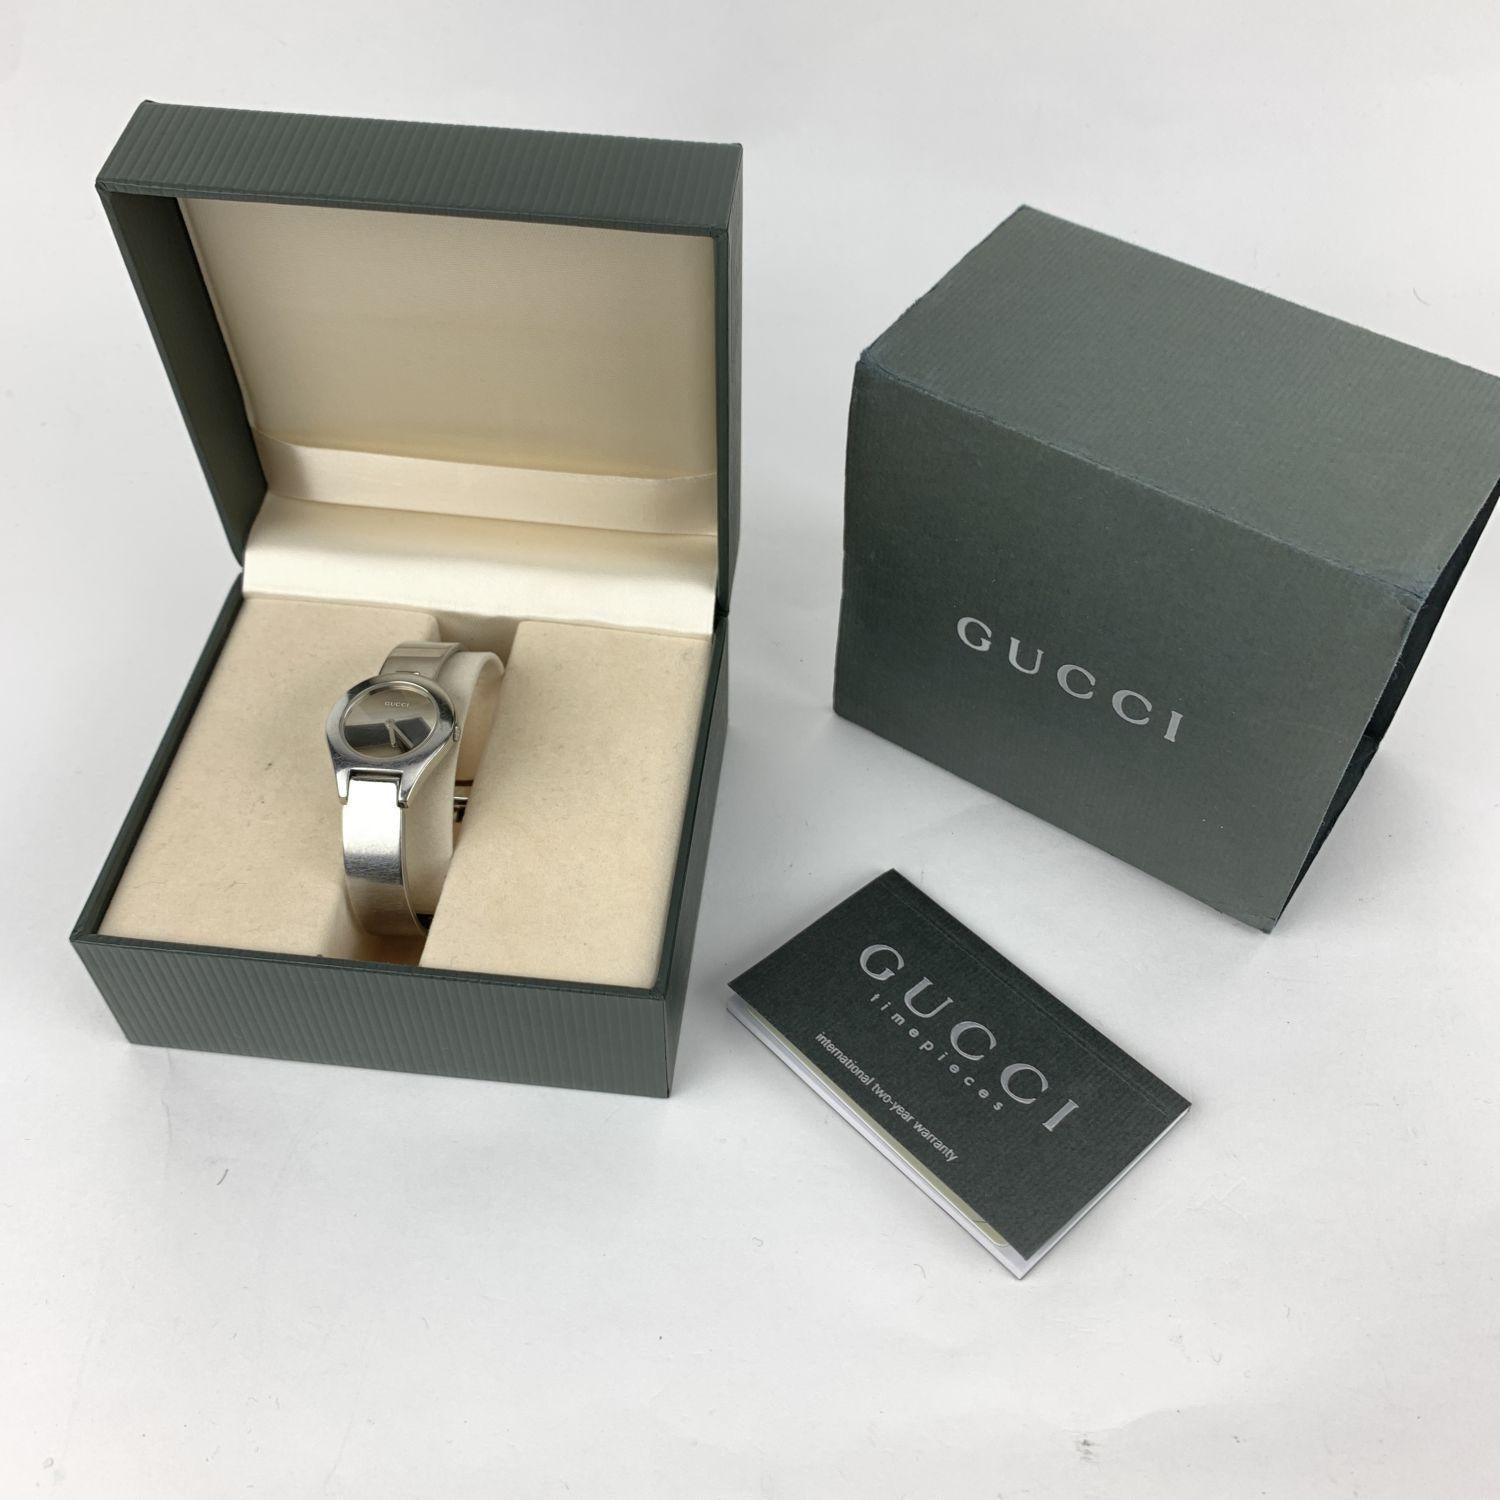 Beautiful Wristwatch by GUCCI, mod. 6700 L. Crafted on stainless steel Black dial. Gucci baton hour, minute & second hands. Quartz movement. Stainless steel round case (width: 26 mm). Belt buckle band. Sapphire crystal. 'GUCCI' and 'Swiss made'